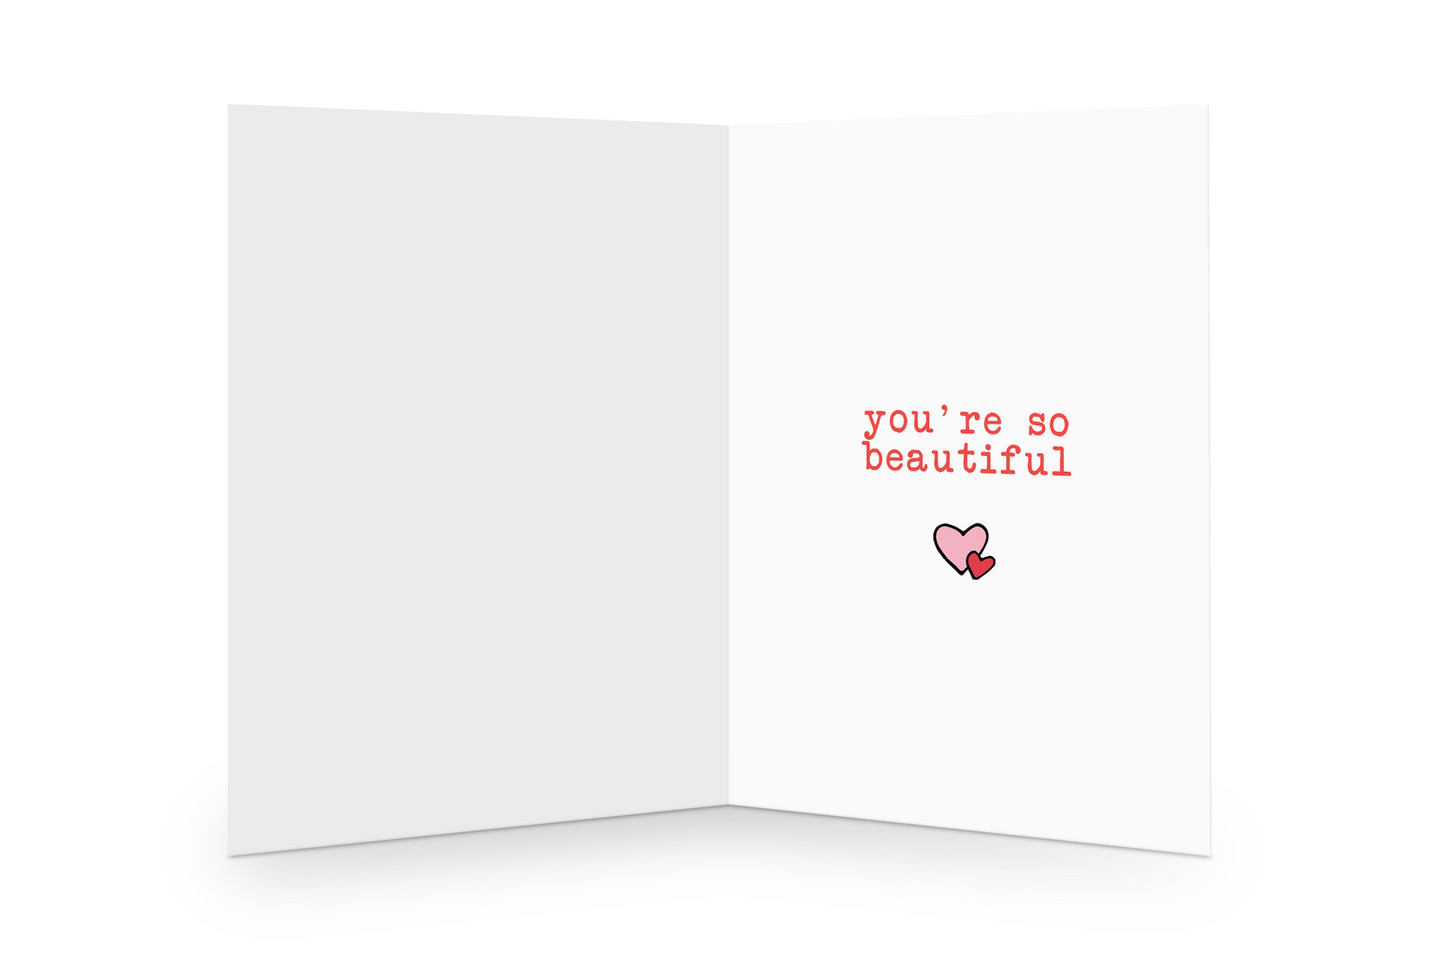 You're So Beautiful text inside Greeting Card 